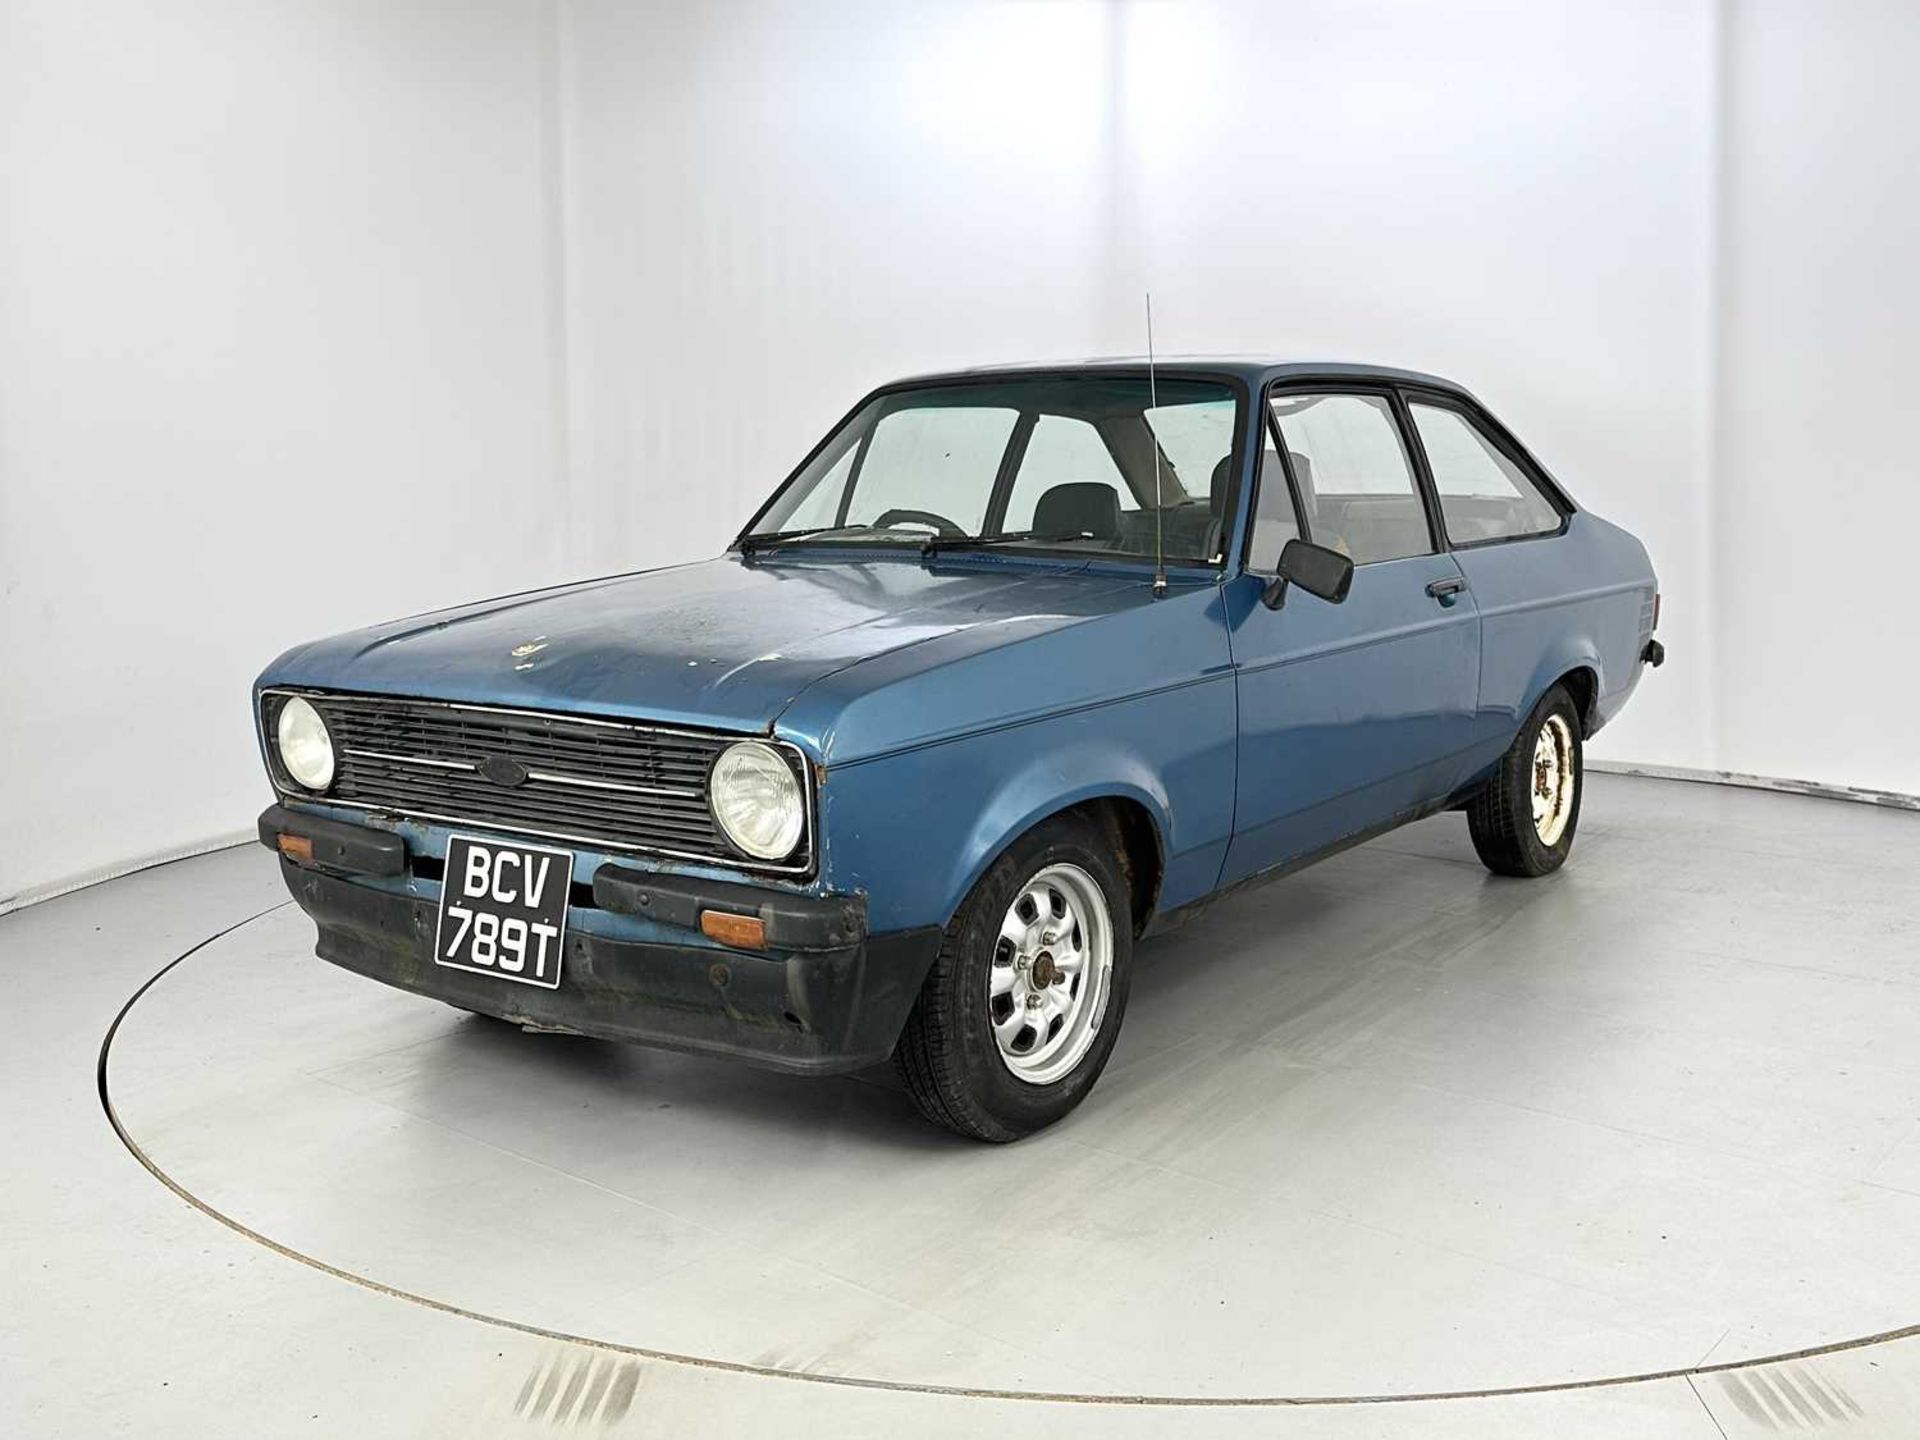 1979 Ford Escort 1600 Sport - Image 3 of 22